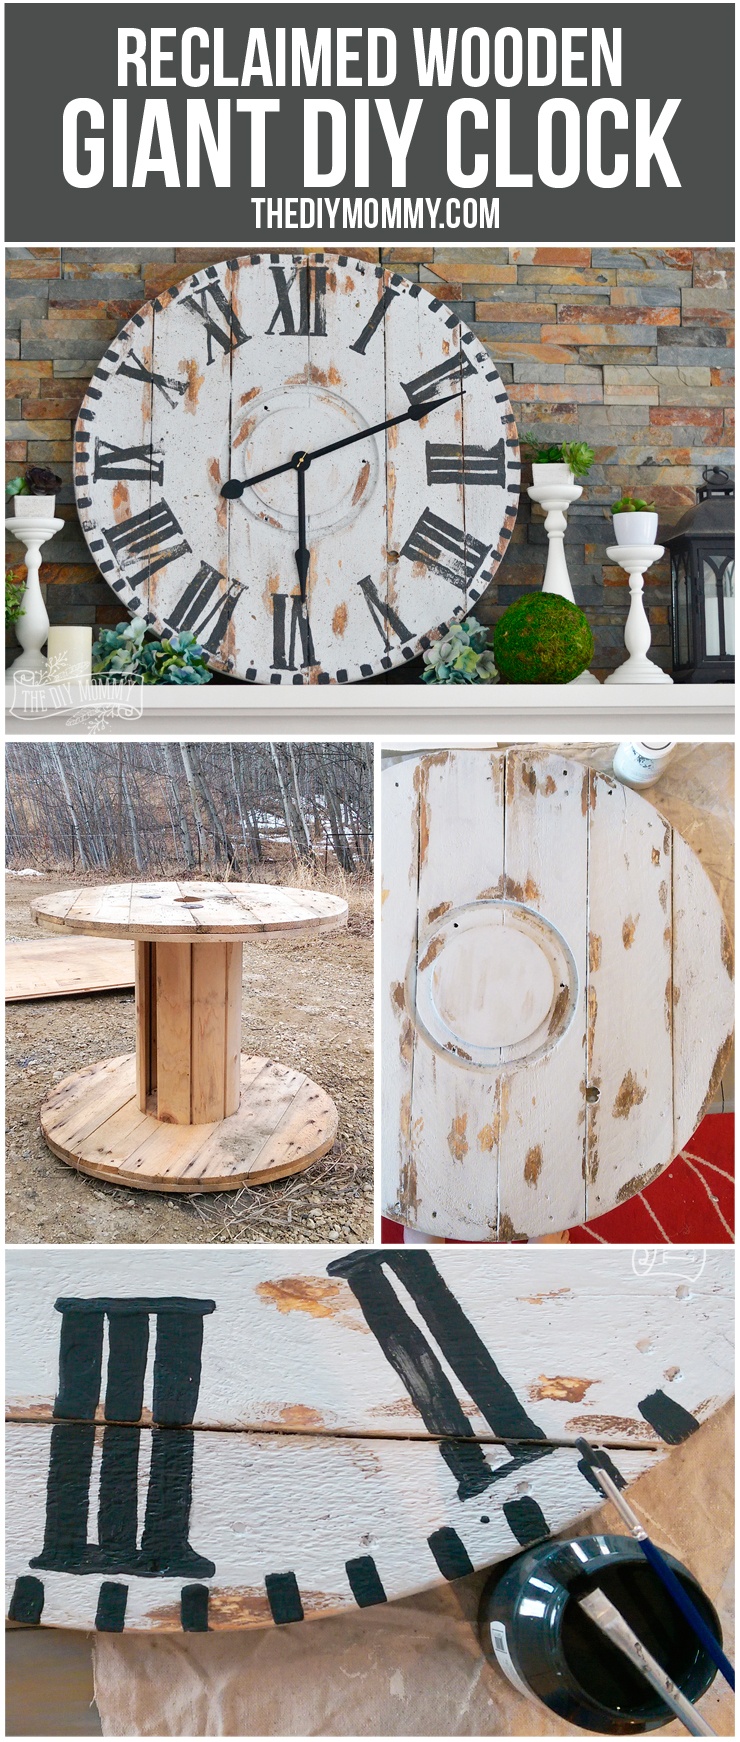 12 Rustic Wall Clock Ideas That Will Add A Touch Of Diy To Any Space Homelovr